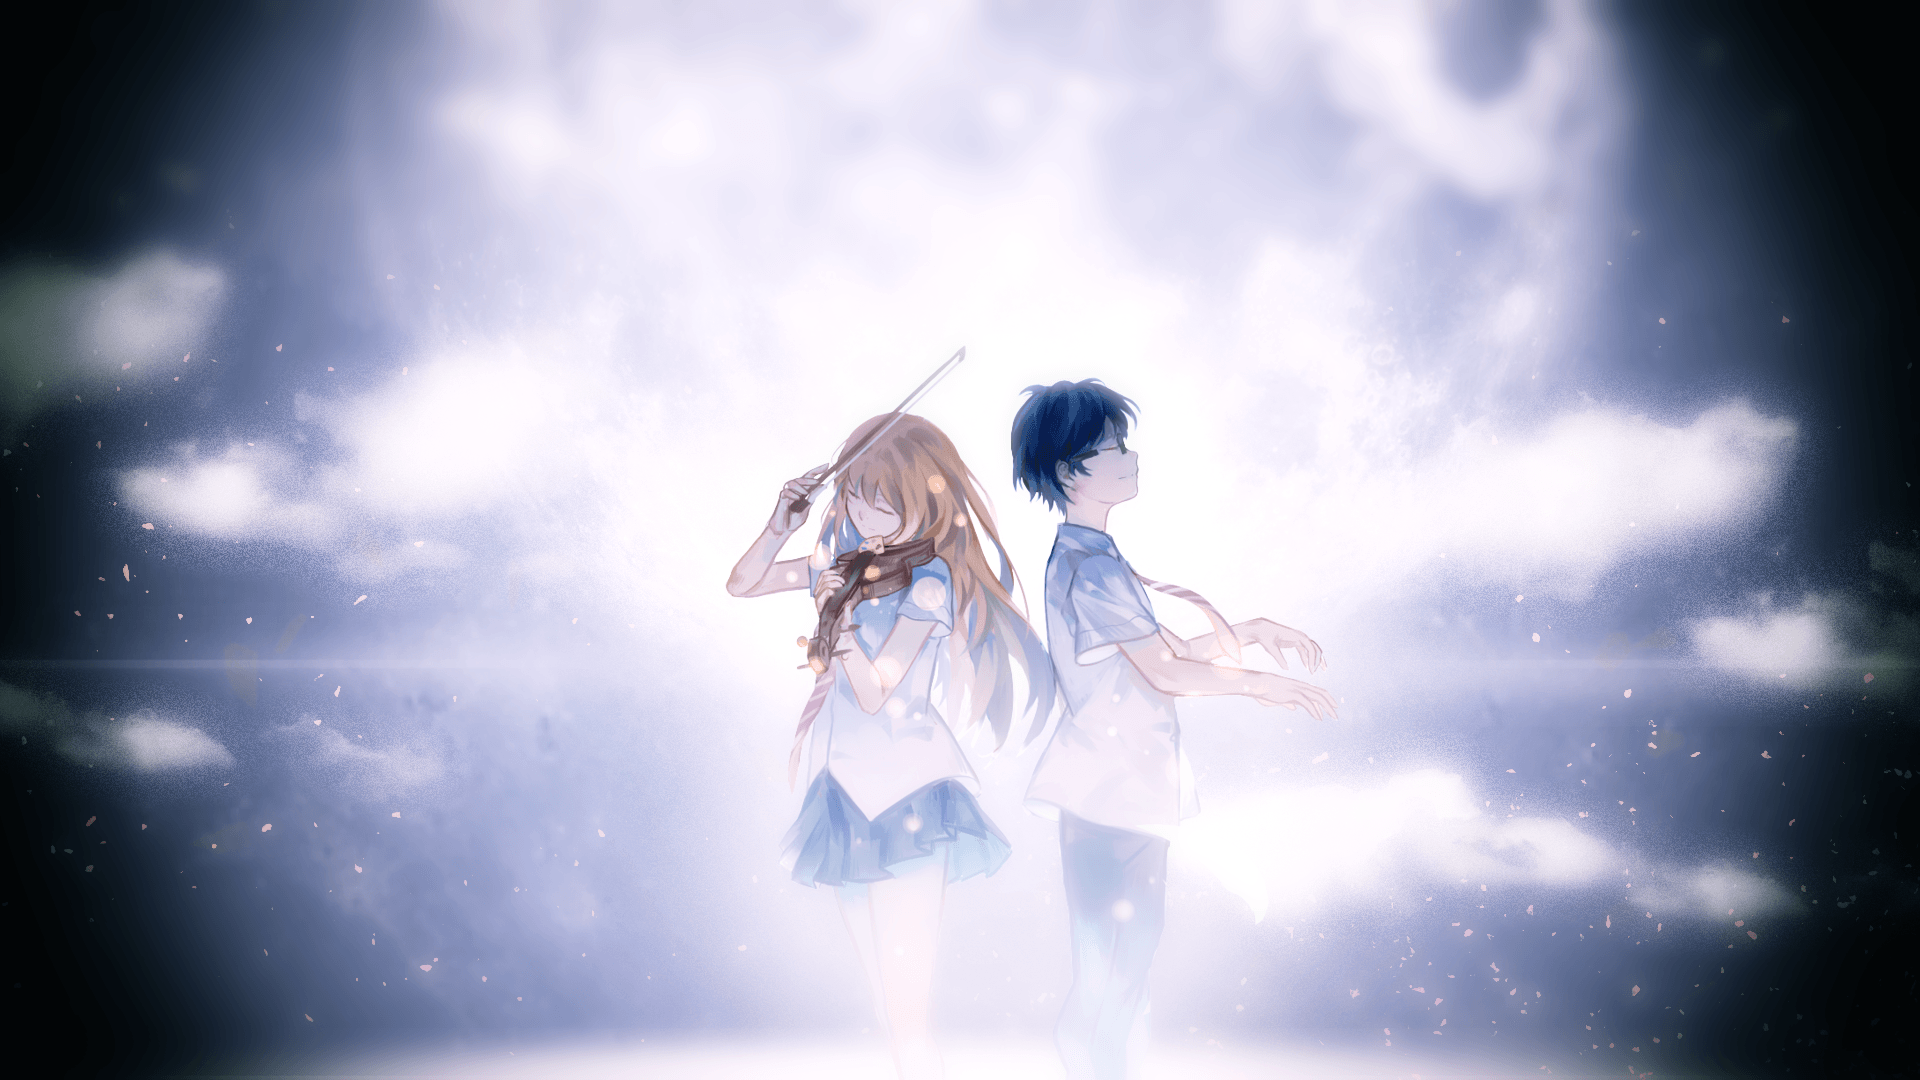 More Like Your Lie In April Wallpaper